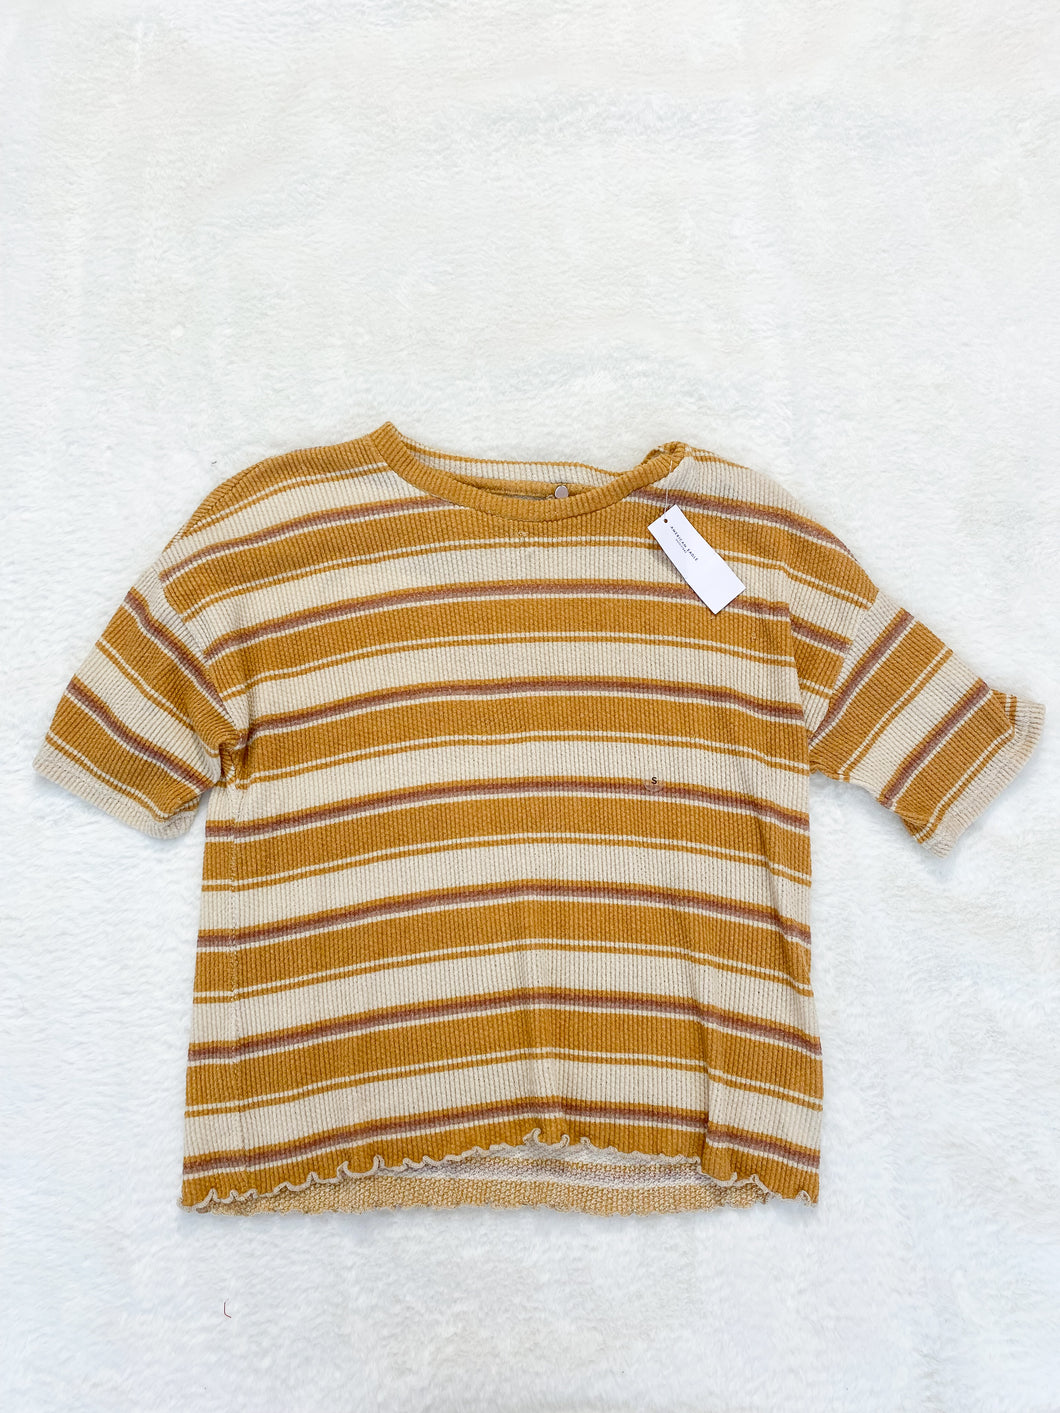 American Eagle Short Sleeve Top Size Small *